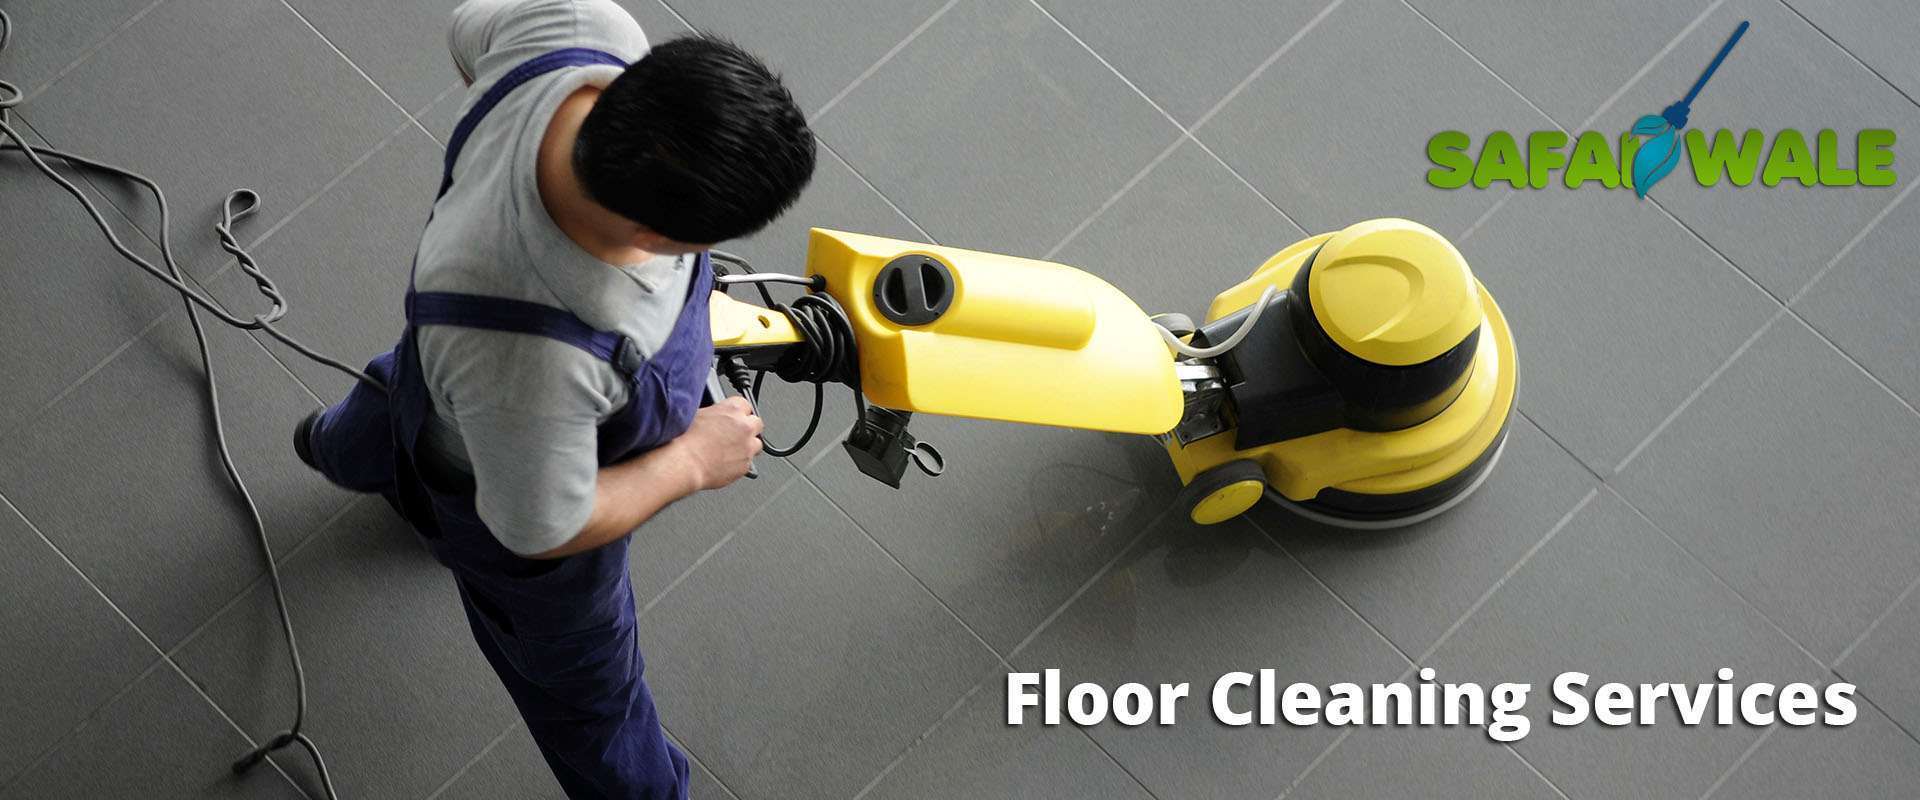 floor cleaning services 